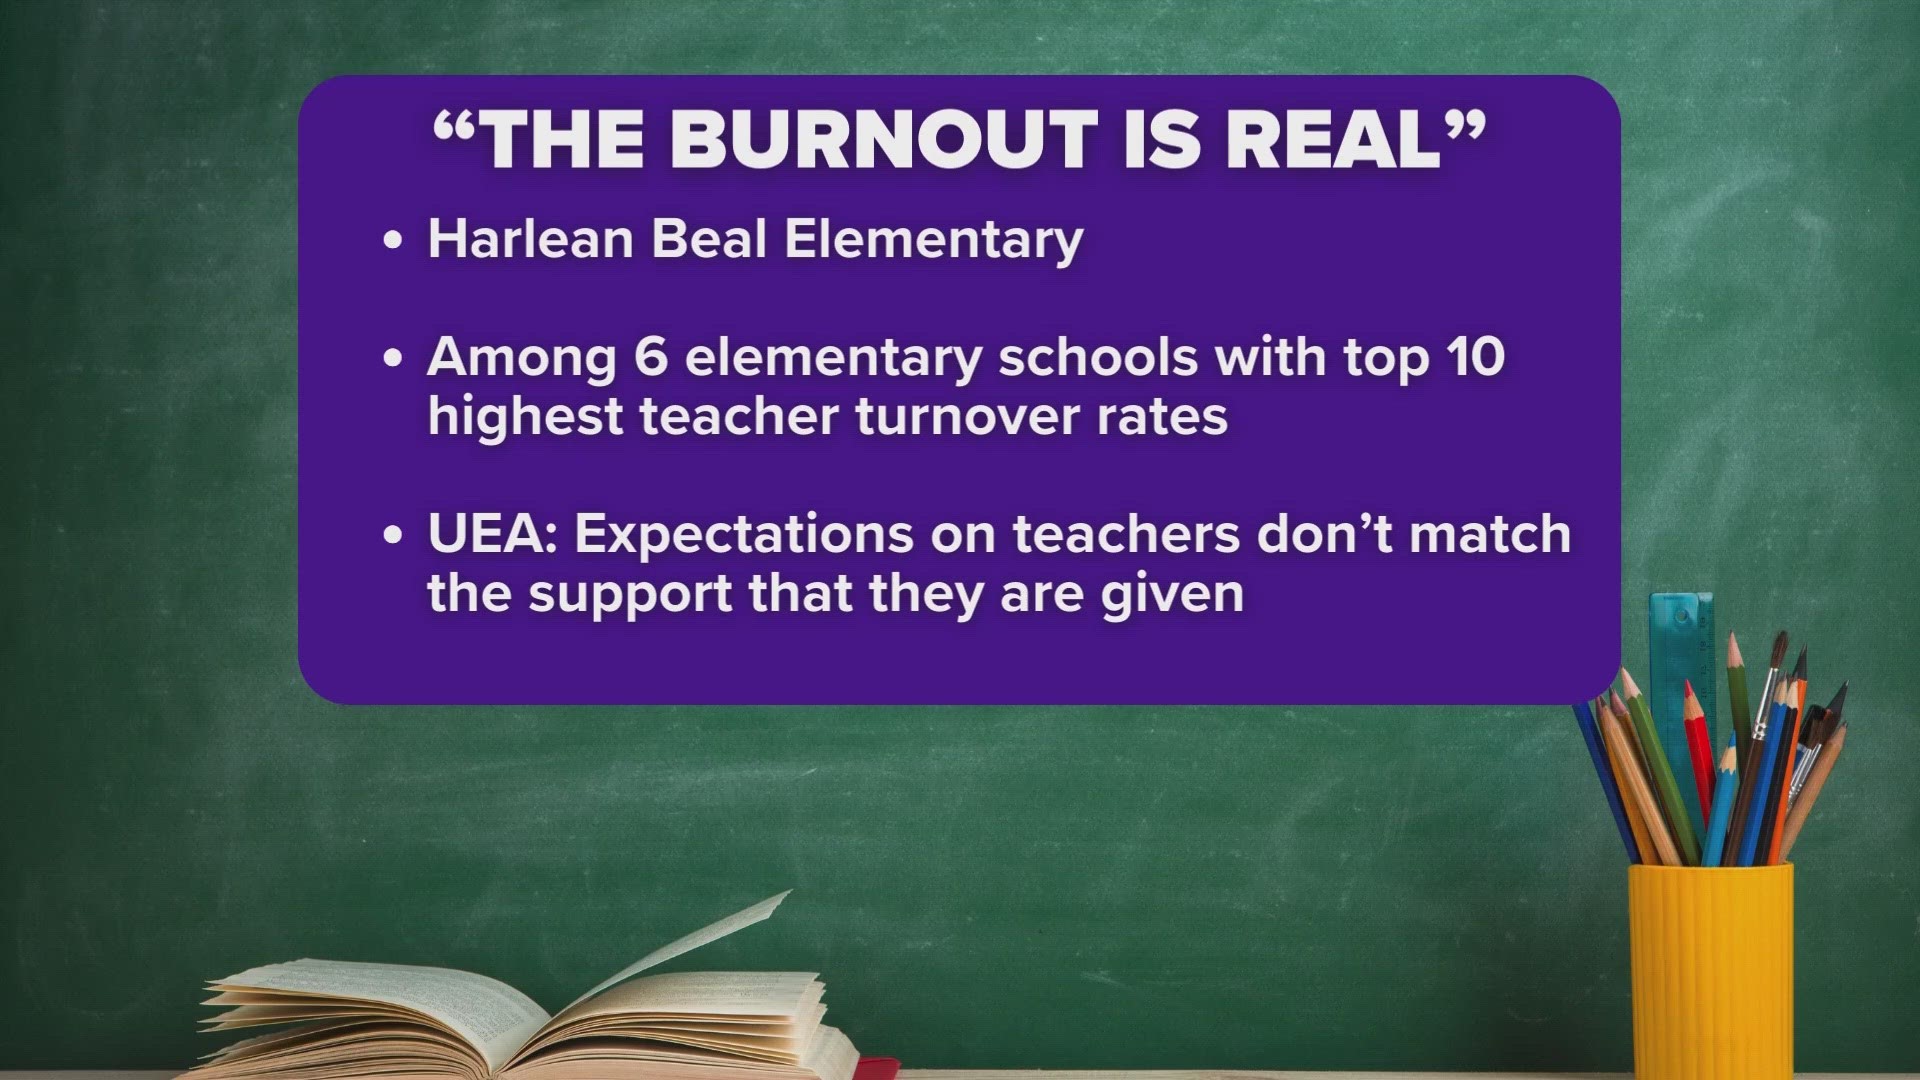 According to the United Educators Association, Harlean Beal Elementary has one of the top 10 highest turnover for teachers in Fort Worth ISD.